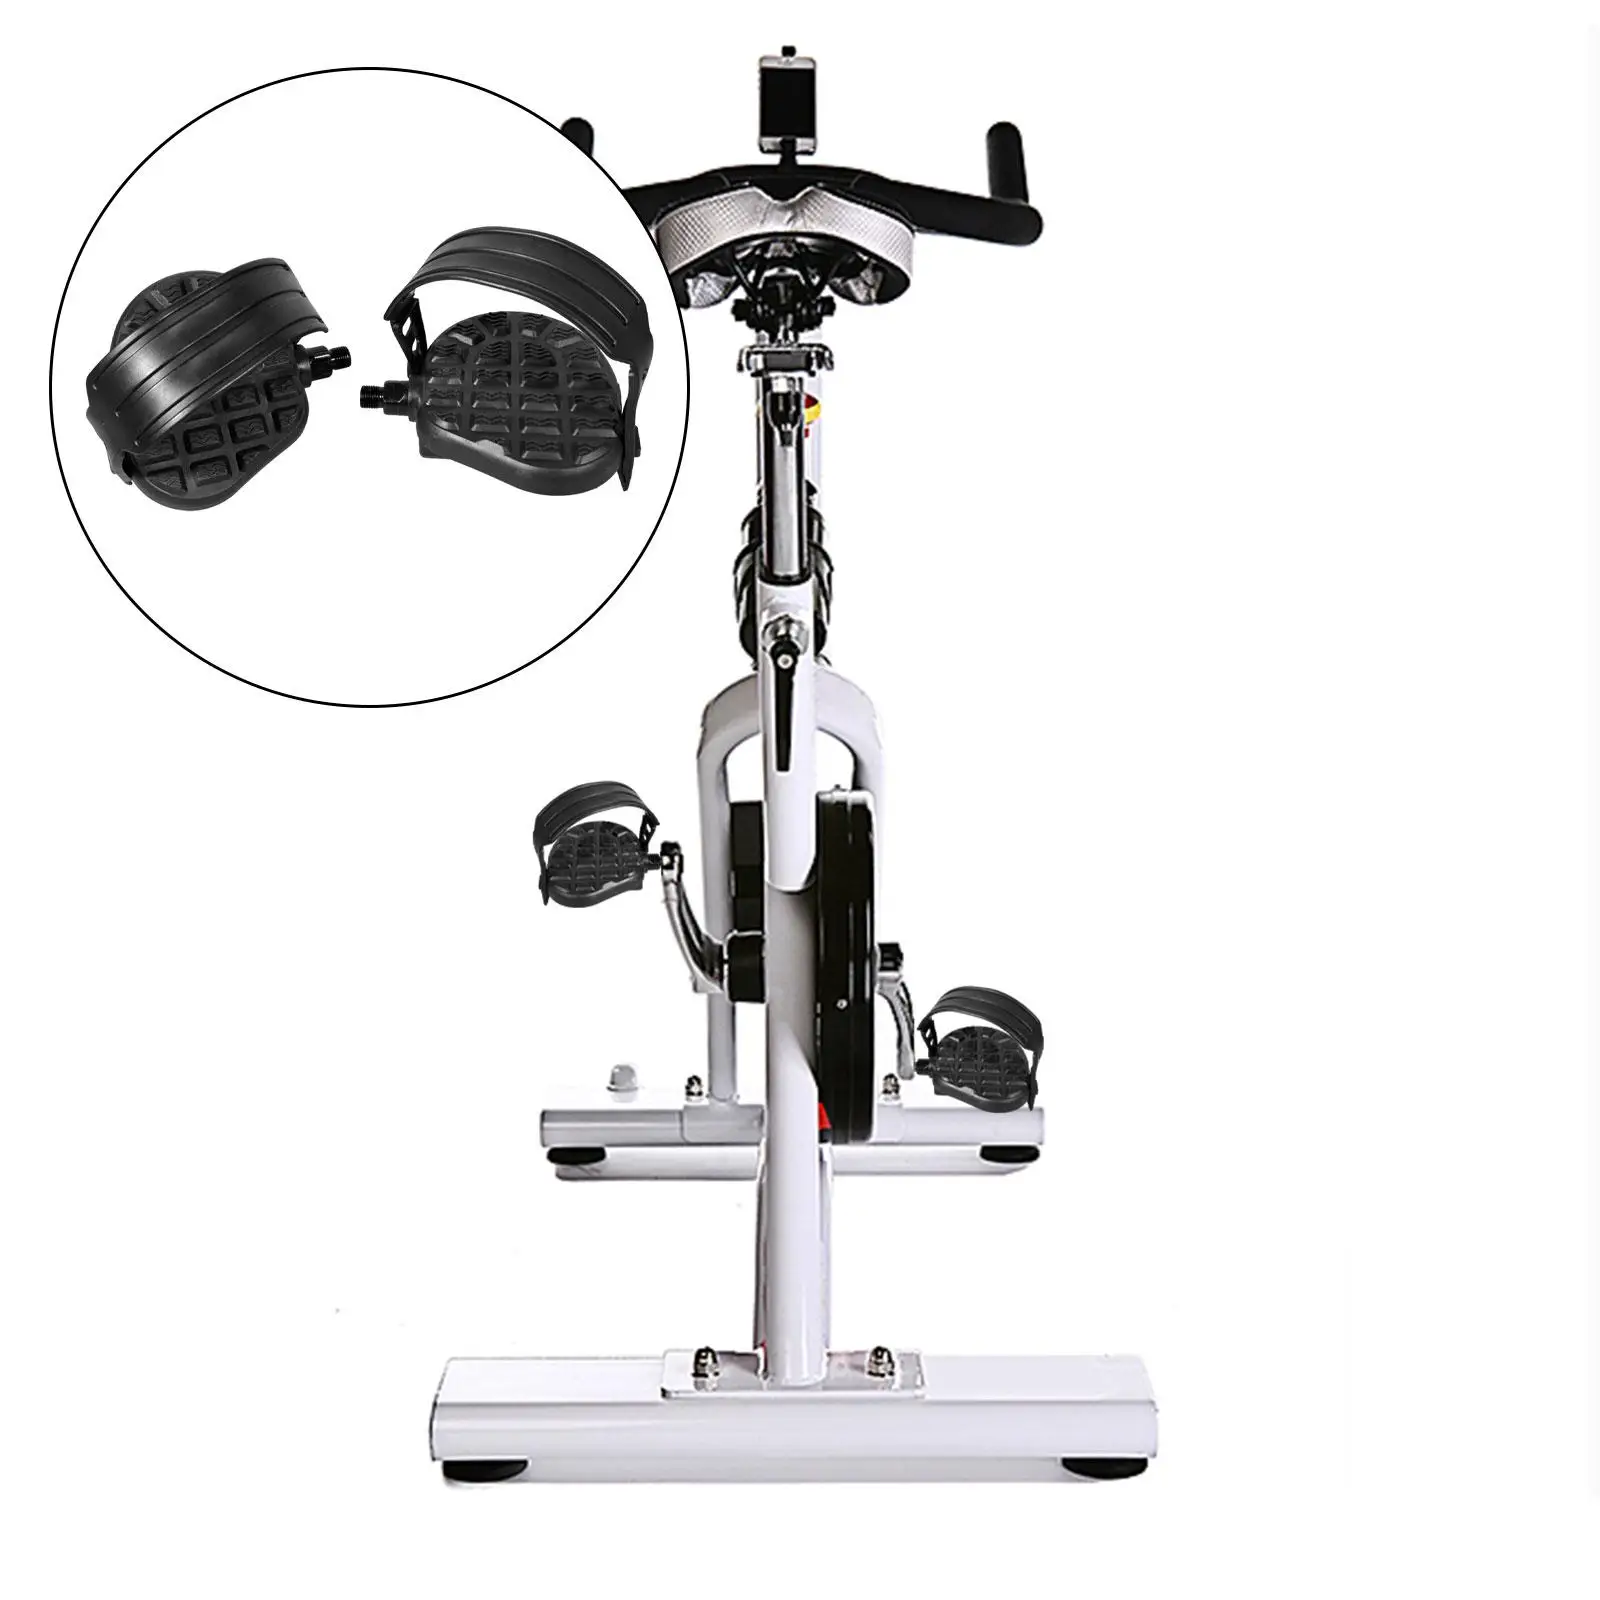 Universal Exercise Bike Pedals Schwarz Non Slip Durable Exercycle Lightweight Replacement Platform Pedals for Cycling Exercise